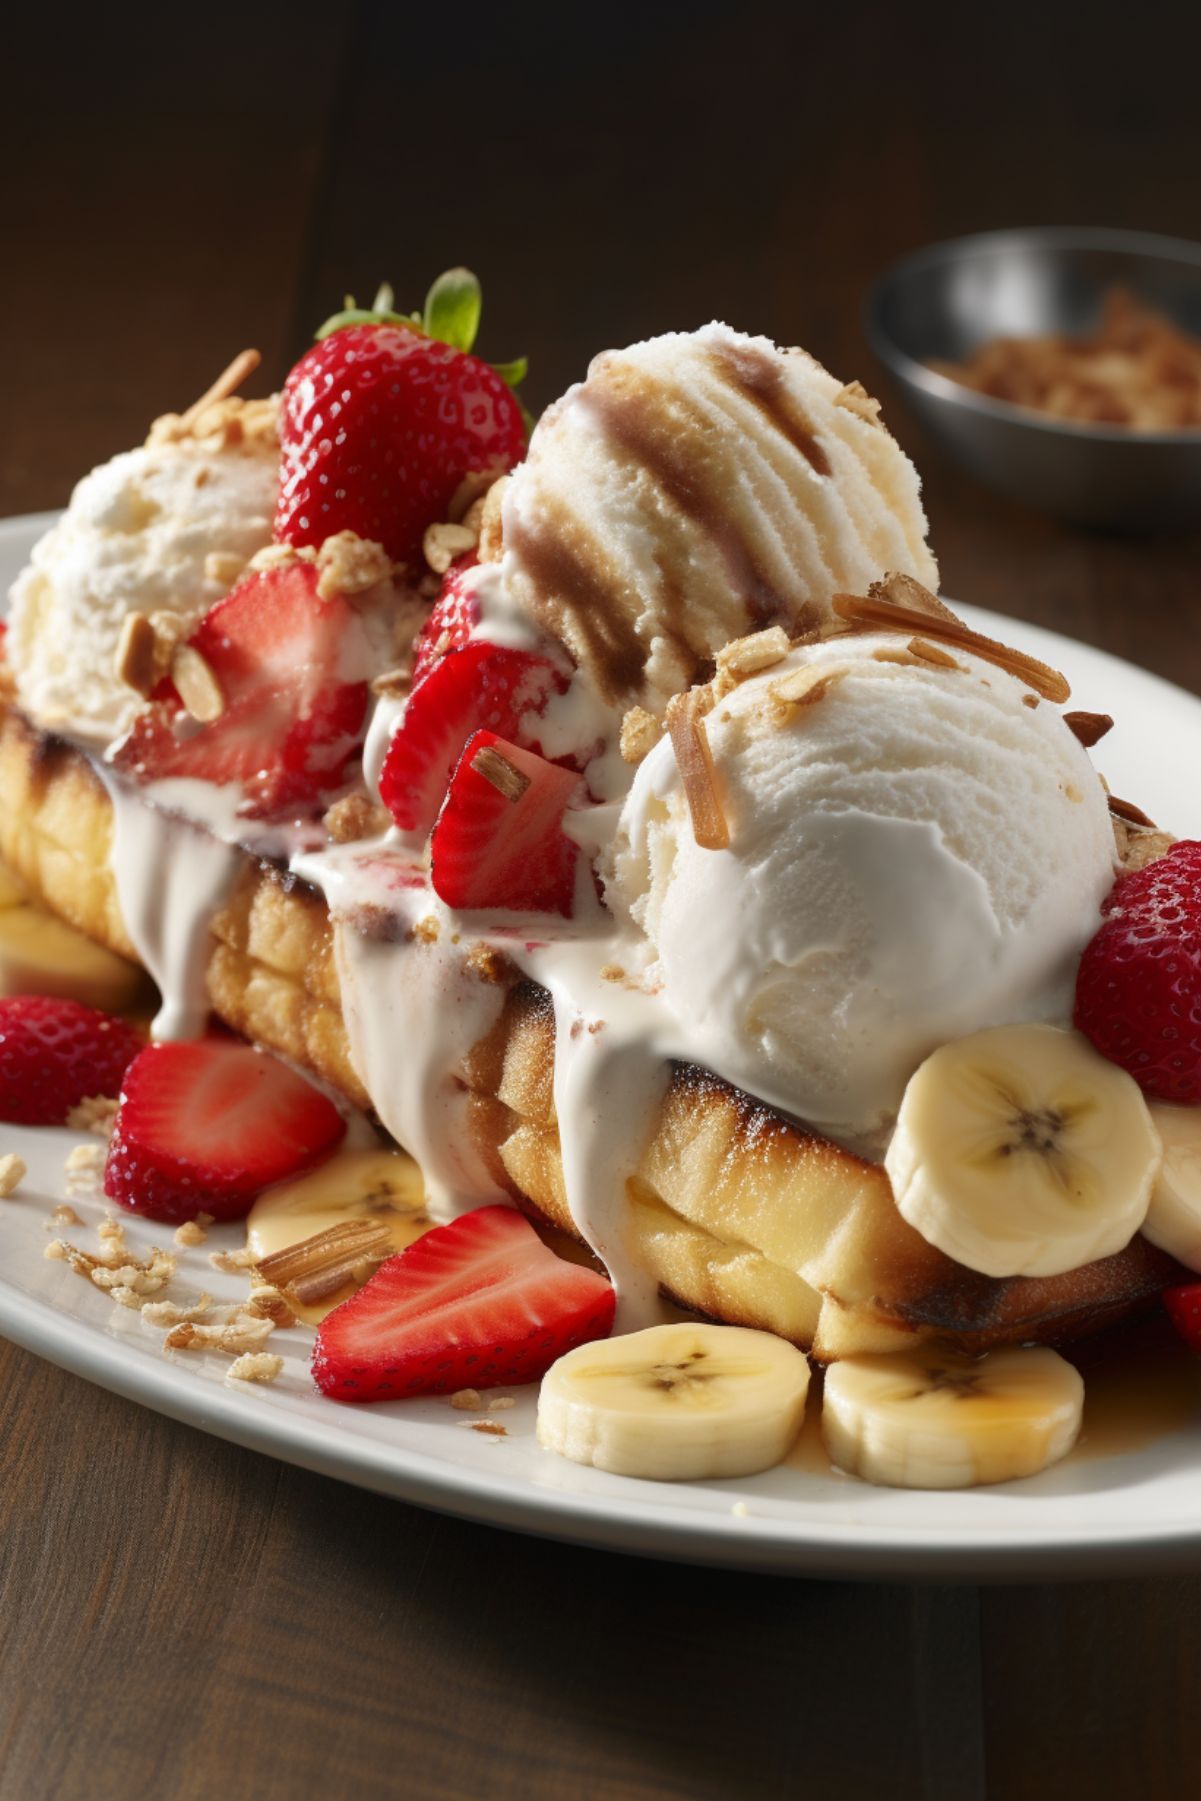 Closeup of Easy Broiled Banana Split piled high with vanilla ice cream, strawberries, bananas, and nuts.